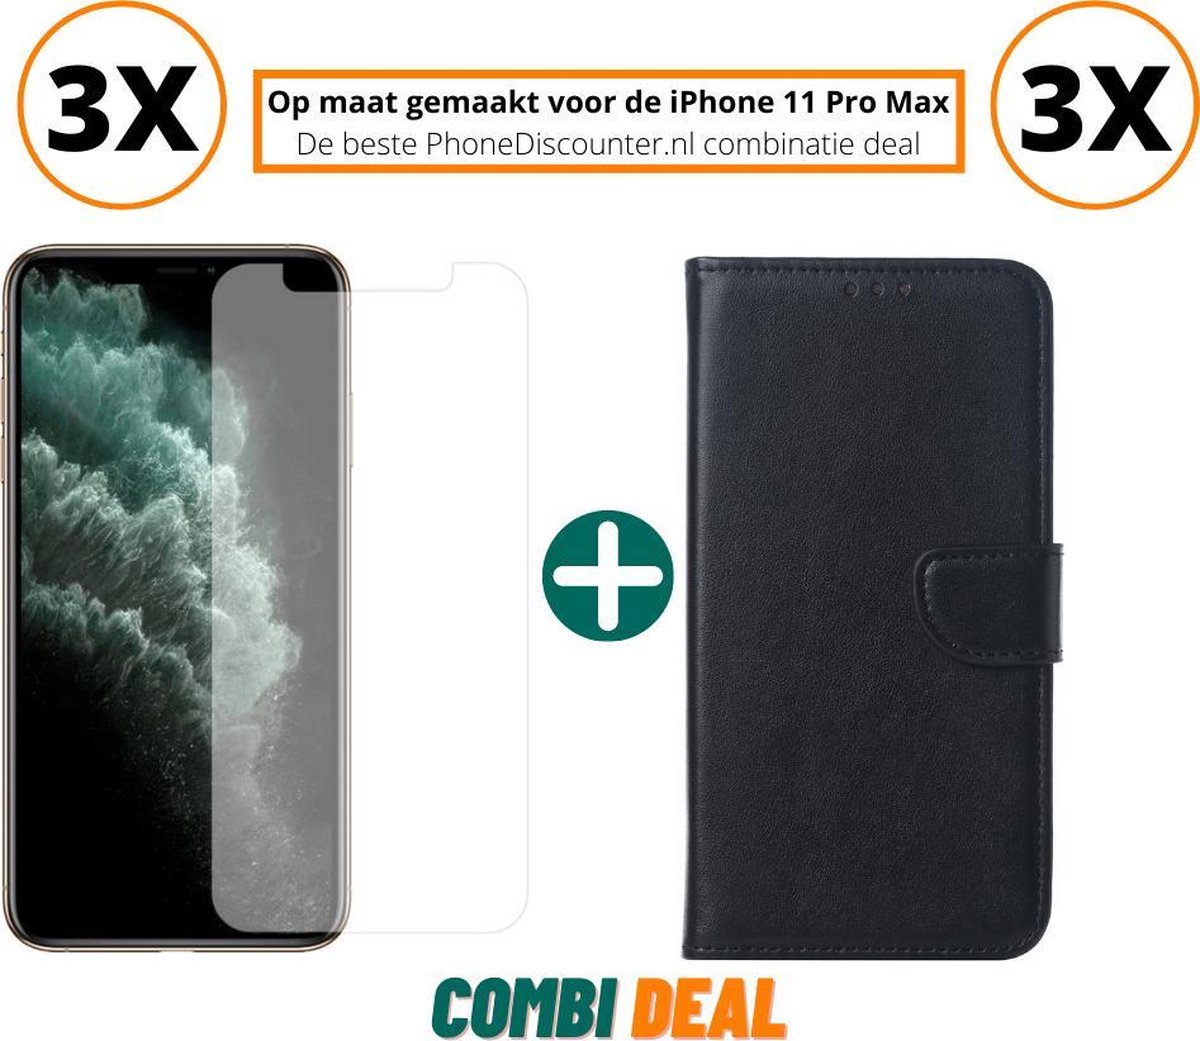 iphone 11 pro max cover case | iPhone 11 Pro Max A2220 full body cover 3x | iPhone 11 Pro Max stand case zwart | 3x hoes iphone 11 pro max apple | iPhone 11 Pro Max beschermhoes + 3x iPhone 11 Pro Max gehard glas screenprotector